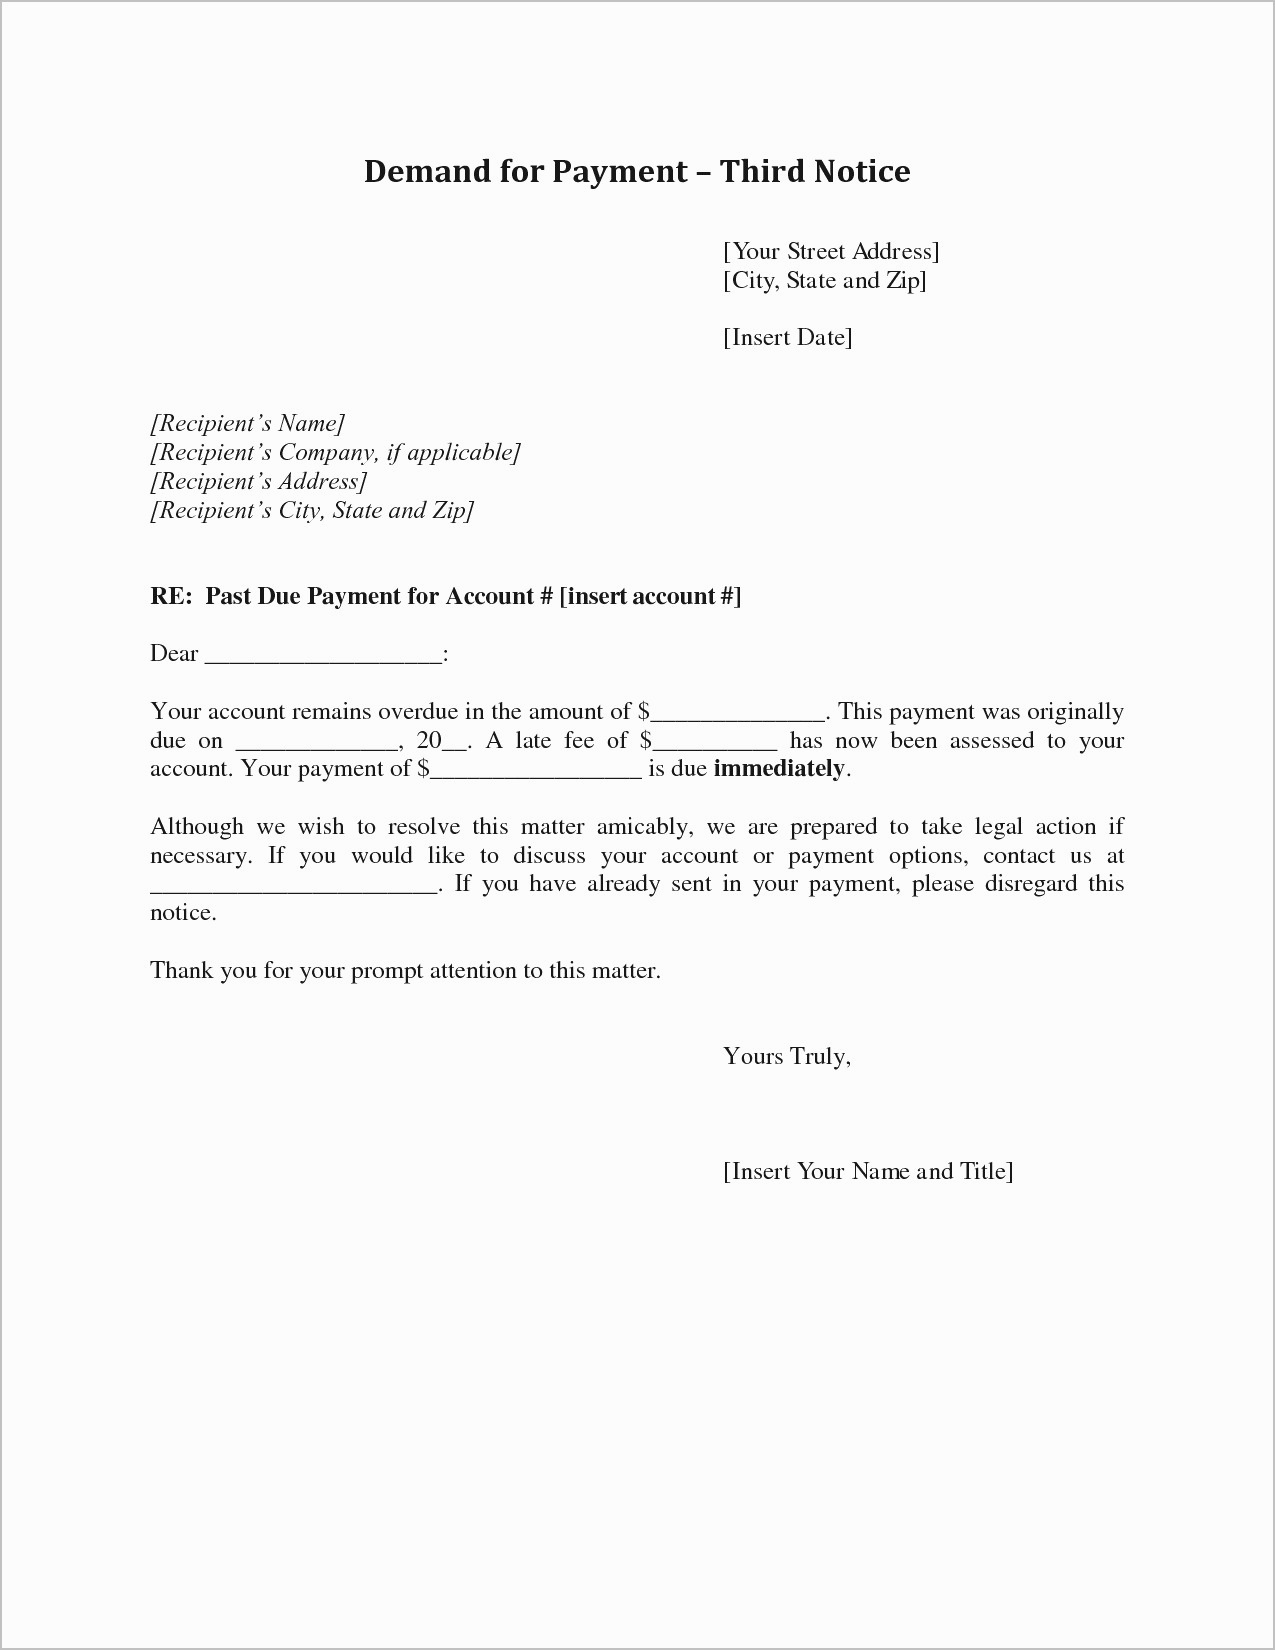 Demand Letter to Landlord Template - Sample Demand Letter for Unpaid Rent Beautiful Letter Od Demand